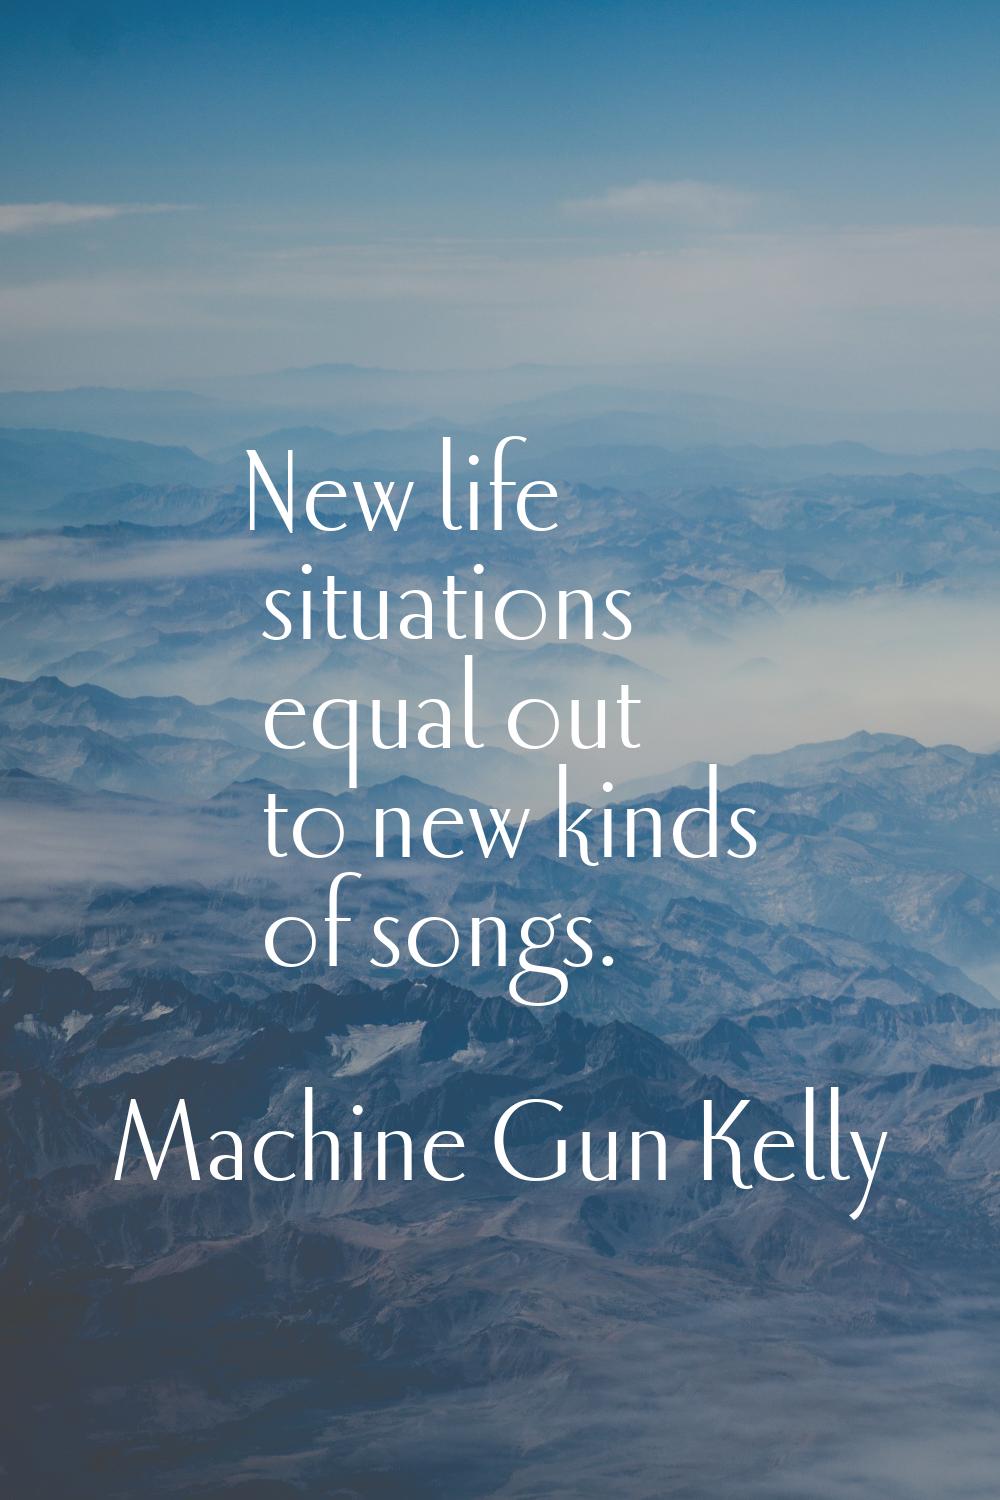 New life situations equal out to new kinds of songs.